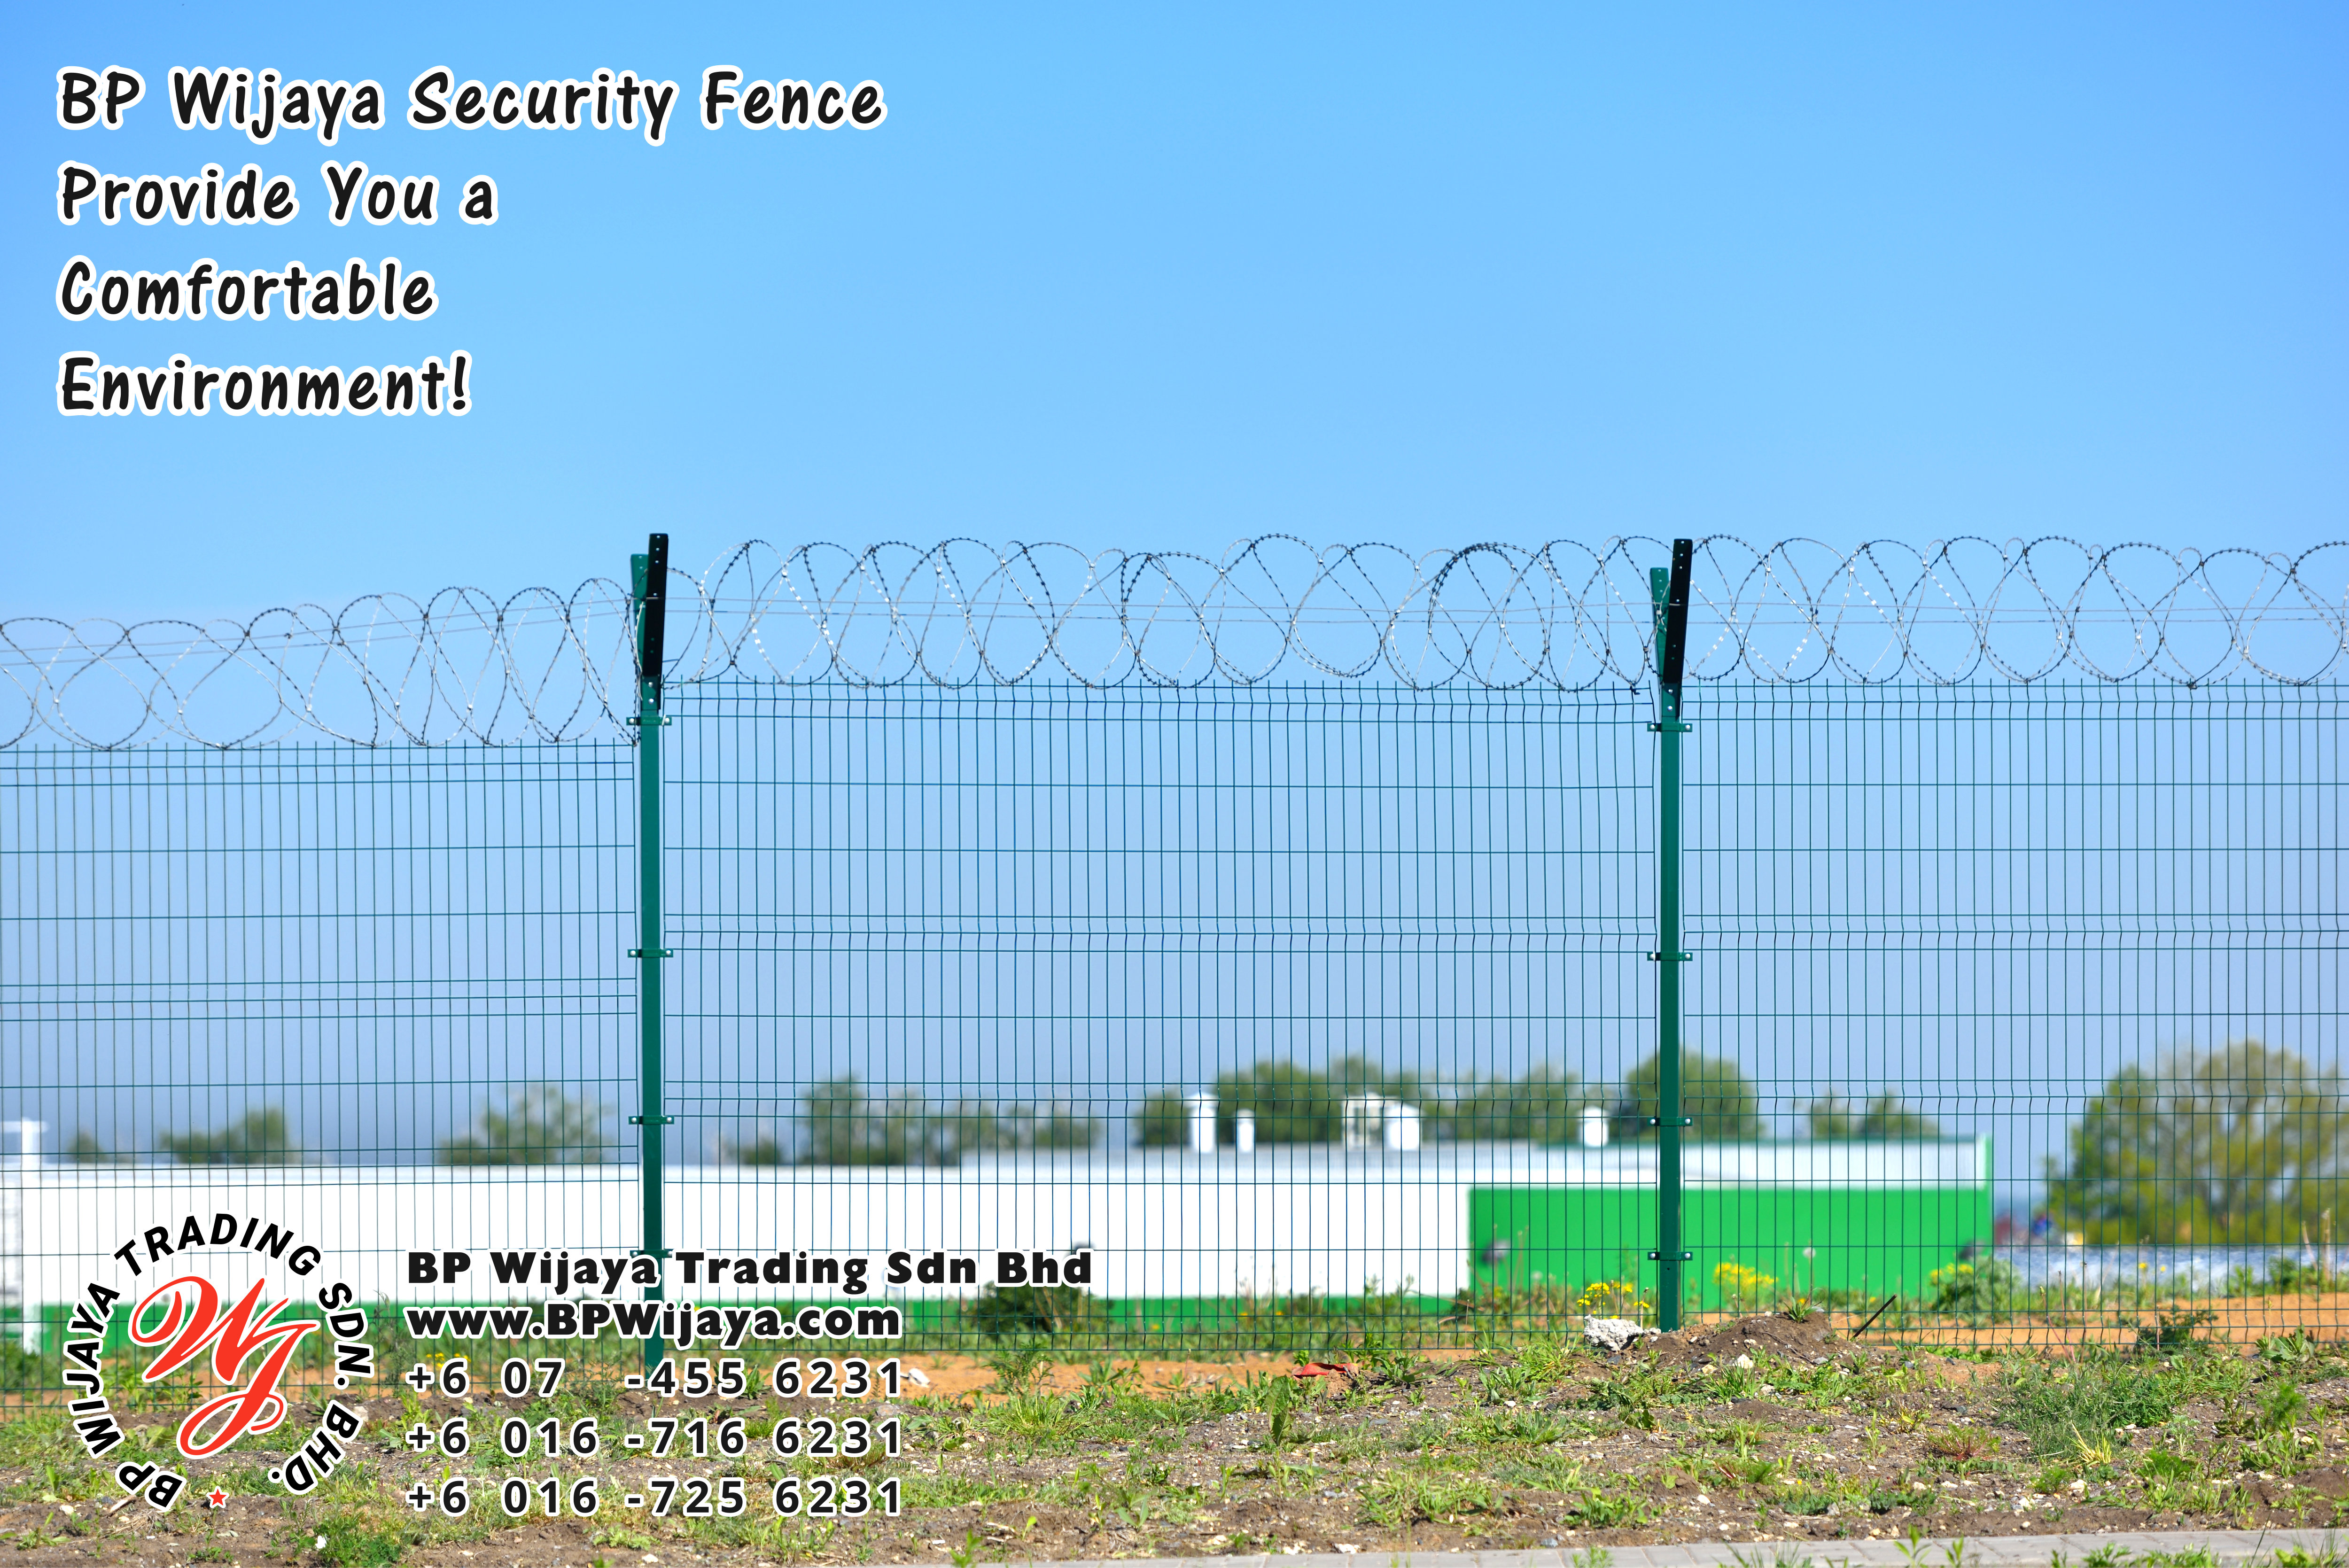 BP Wijaya Trading Sdn Bhd Malaysia Pahang Kuantan Temerloh Mentakab Manufacturer of Safety Fences Building Materials for Housing Construction Site Industial Security Fencing Factory A01-49